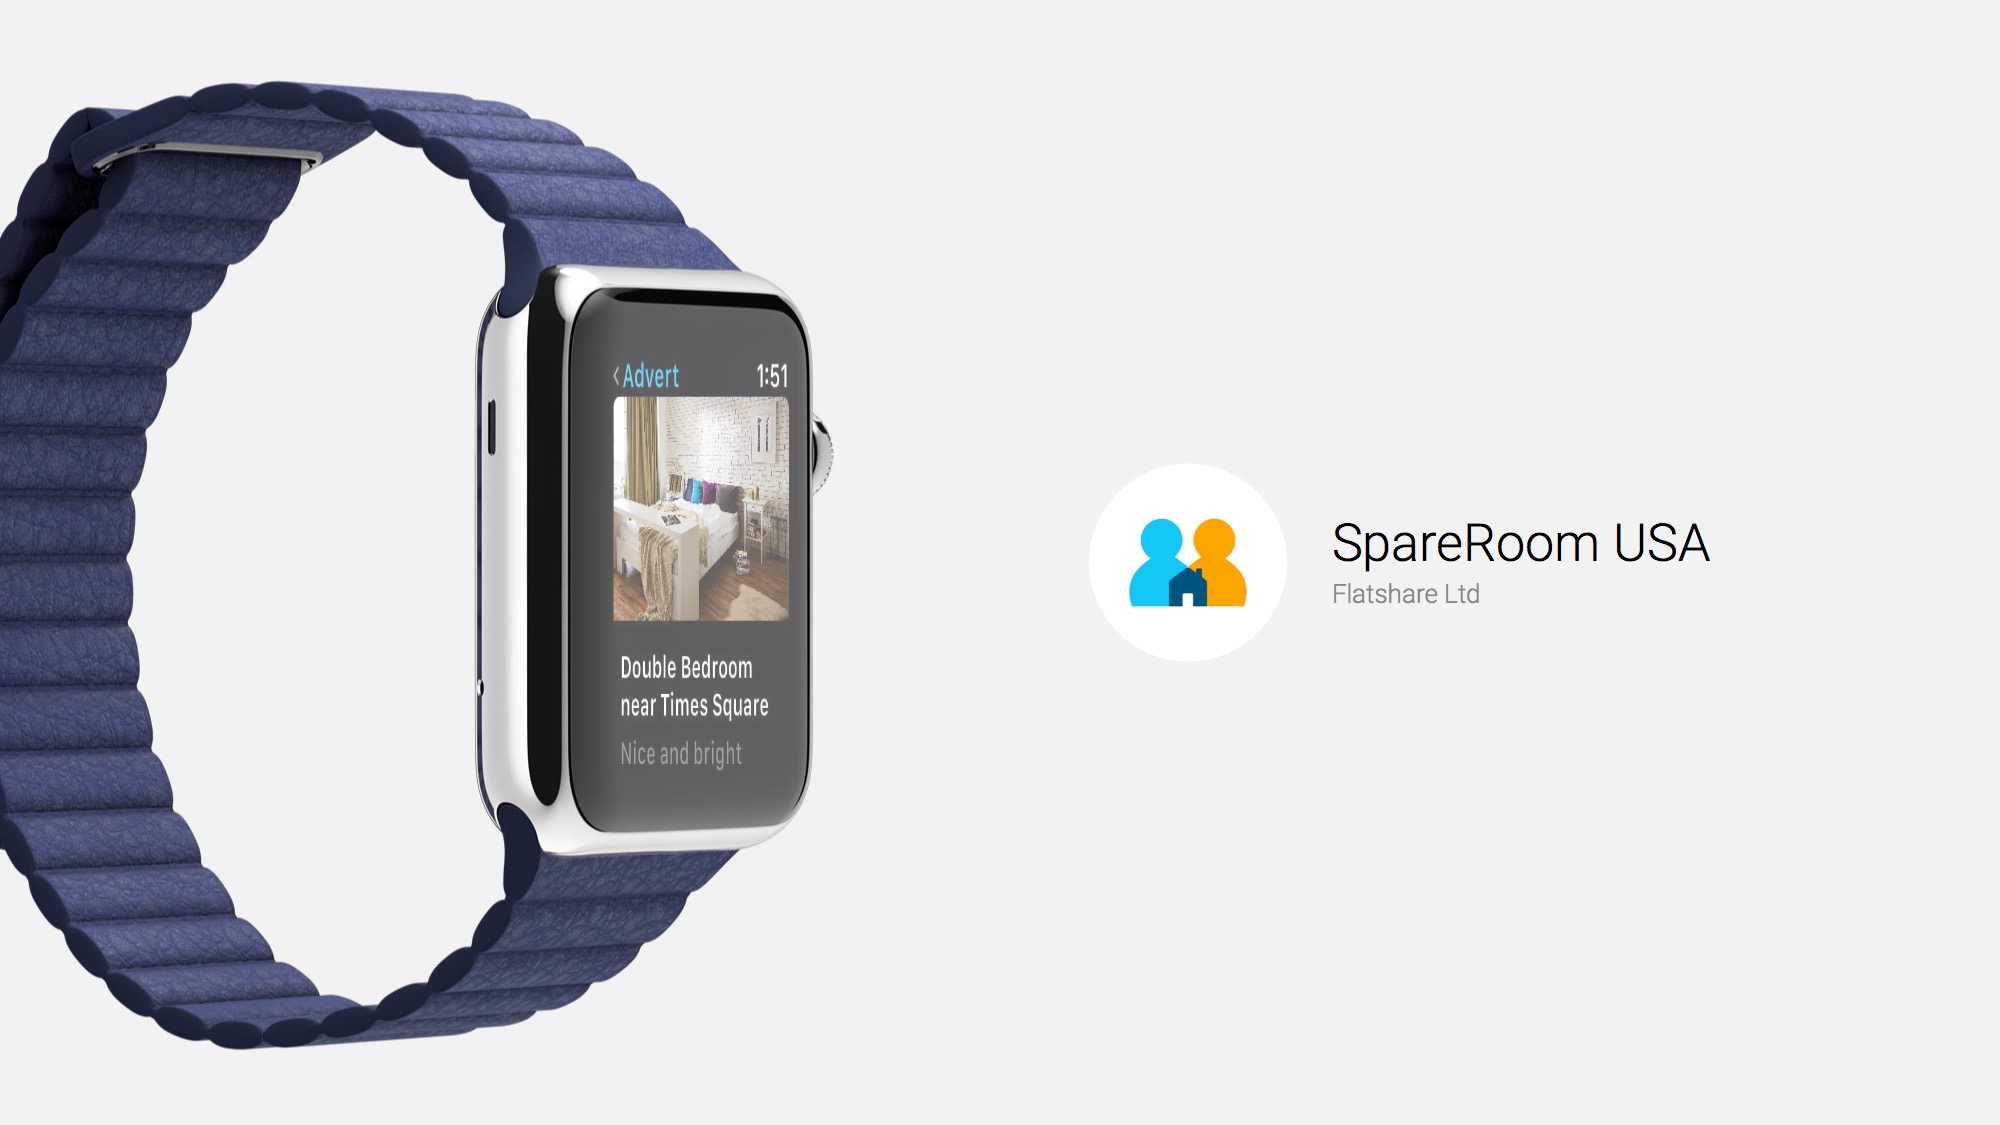 Find a Roommate on Apple Watch With SpareRoom USA